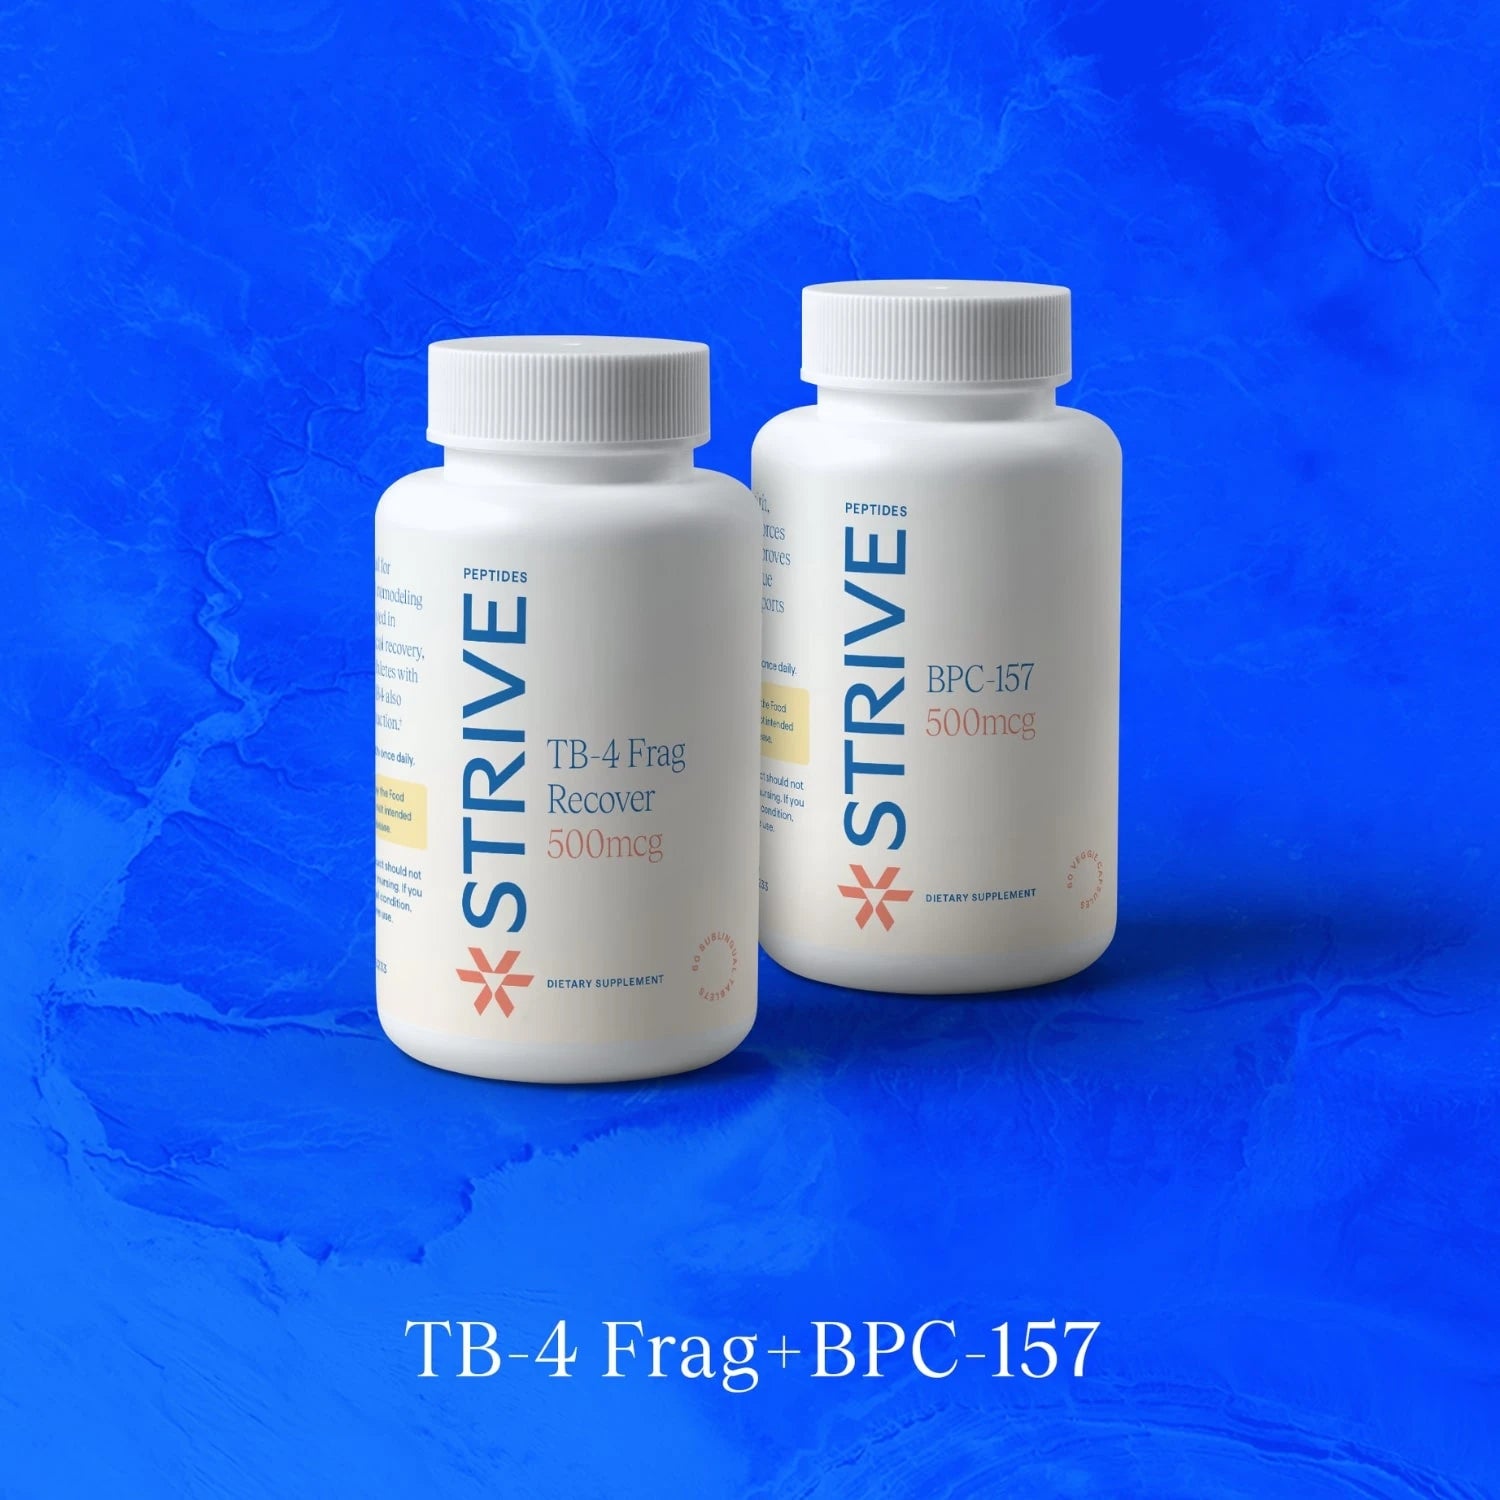 An image of two white bottles of Strive Peptides showing a bundle example with a blue textured background.